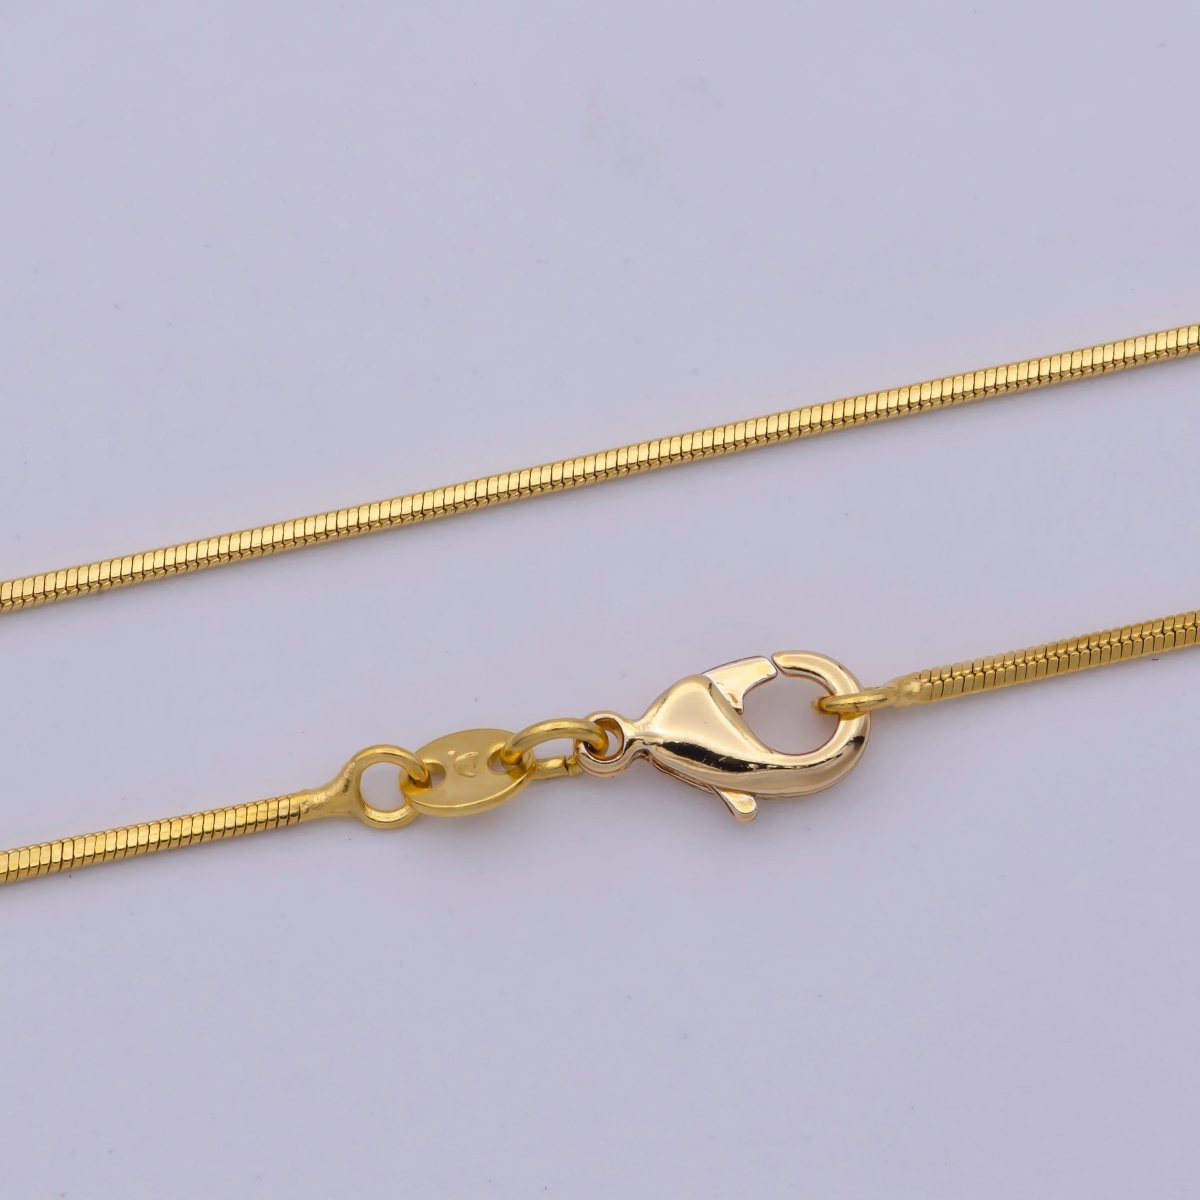 24k Gold Filled Herringbone Chain Necklace - Dainty 0.9mm Gold Snake Chain - 18 Inches Layering Necklace Ready To Wear w/ Lobster Clasp | WA-412 Clearance Pricing - DLUXCA